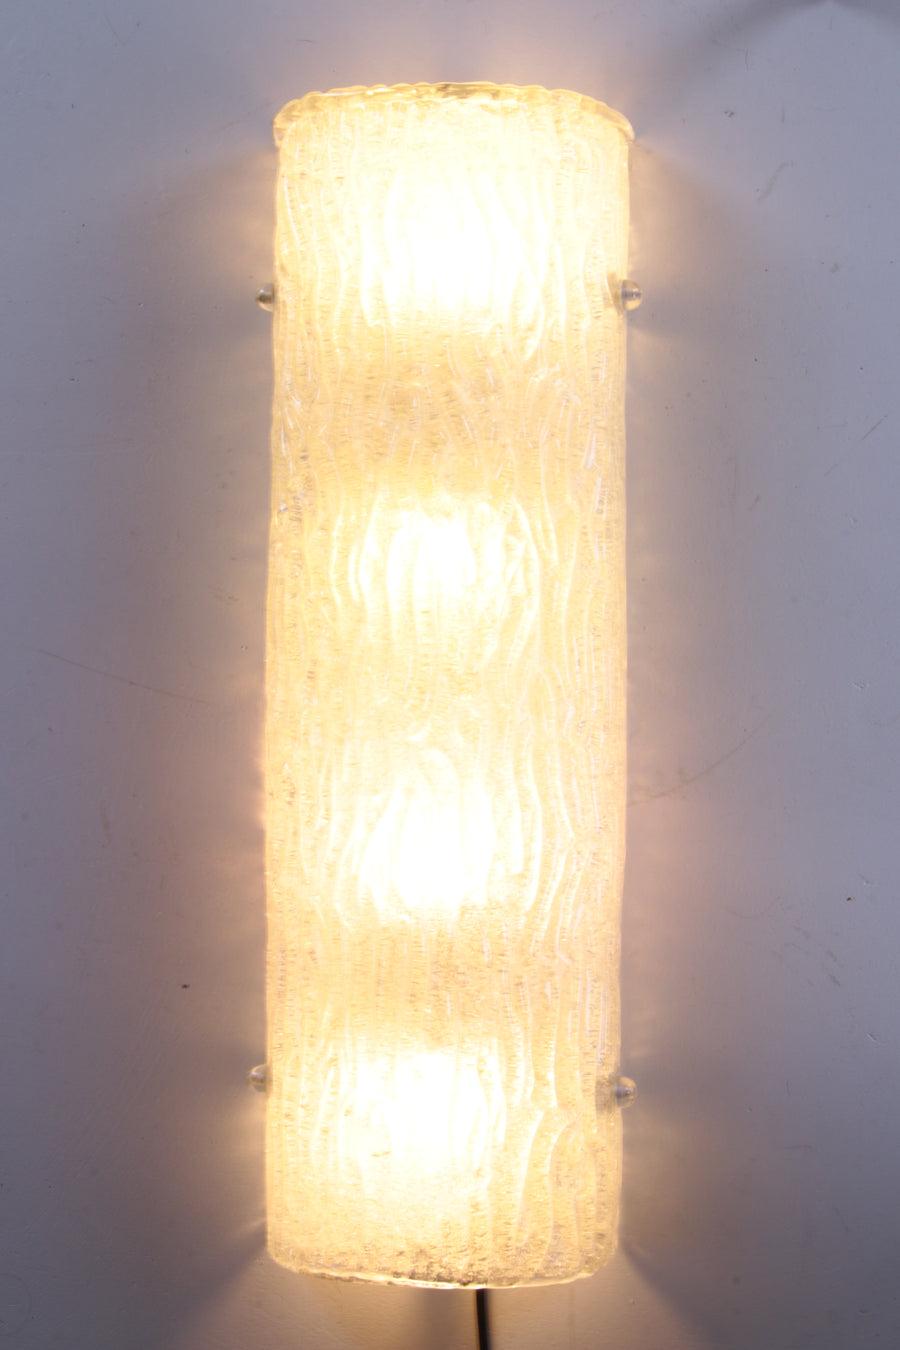 Very Large XXL Ice Wall Lamp by Hillebrand, 1960

Large Wall Lamp with Thick Ice Glass made by Hillebrand

Beautiful on the wall with thick heavy glass and a very nice light effect when the lamp is on.

weight 4 kg to 5 kg

Additional